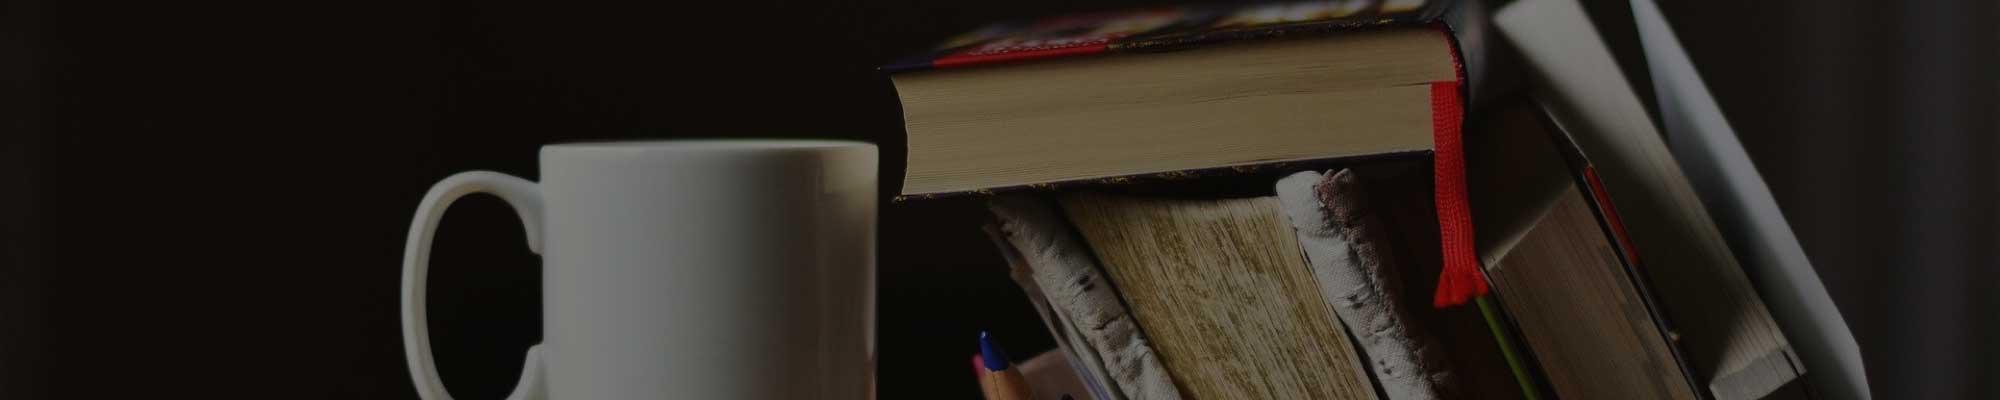 Image of books with a coffee cup next to it.